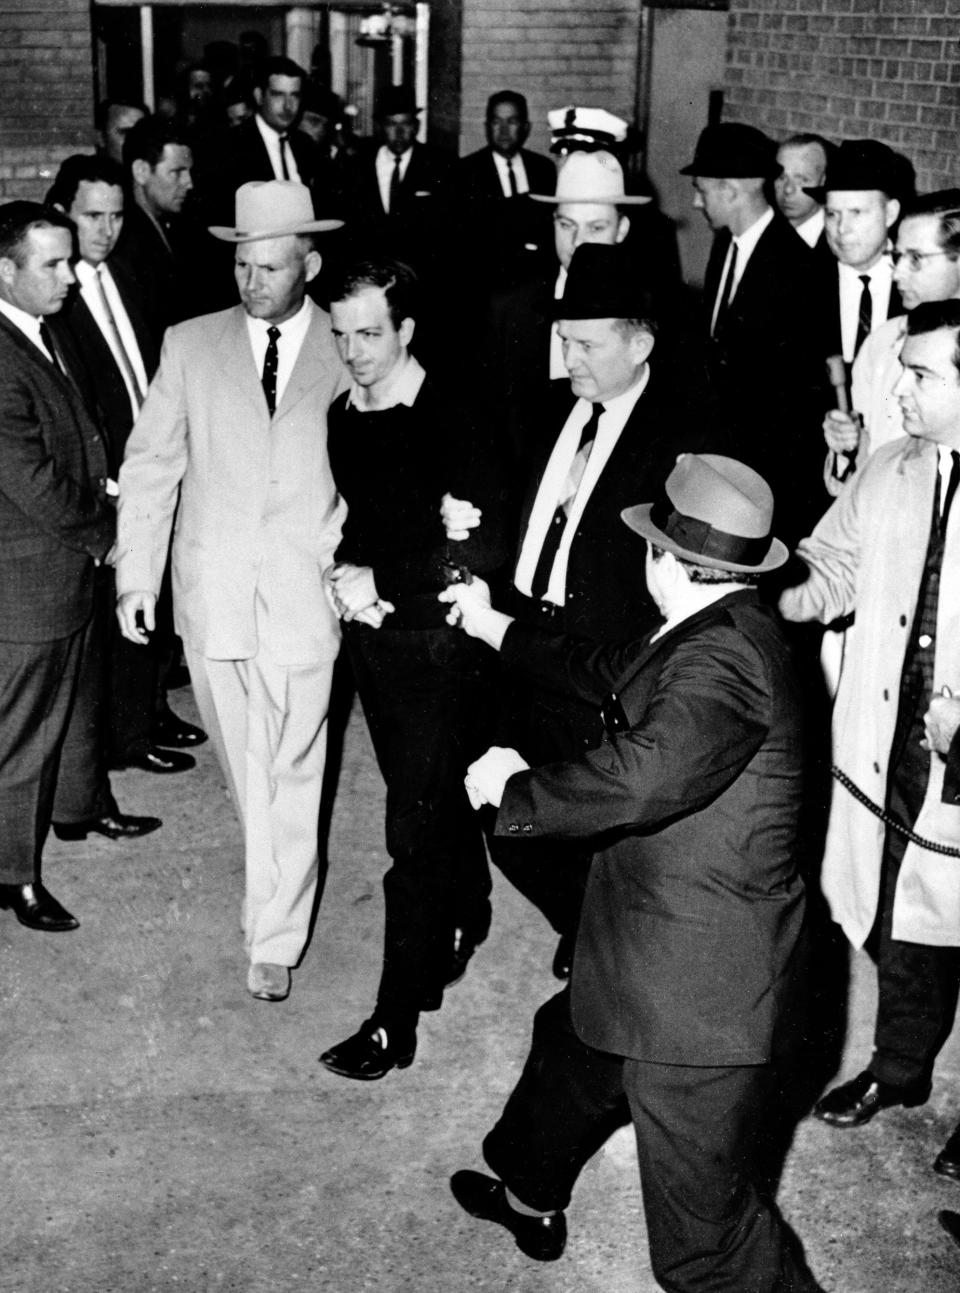 In a Nov. 24, 1963, file photo, President John F. Kennedy assassin Lee Harvey Oswald, center in handcuffs, is shot by Jack Ruby, foreground with a handgun extended in his right hand, in the underground garage of the Dallas police headquarters.